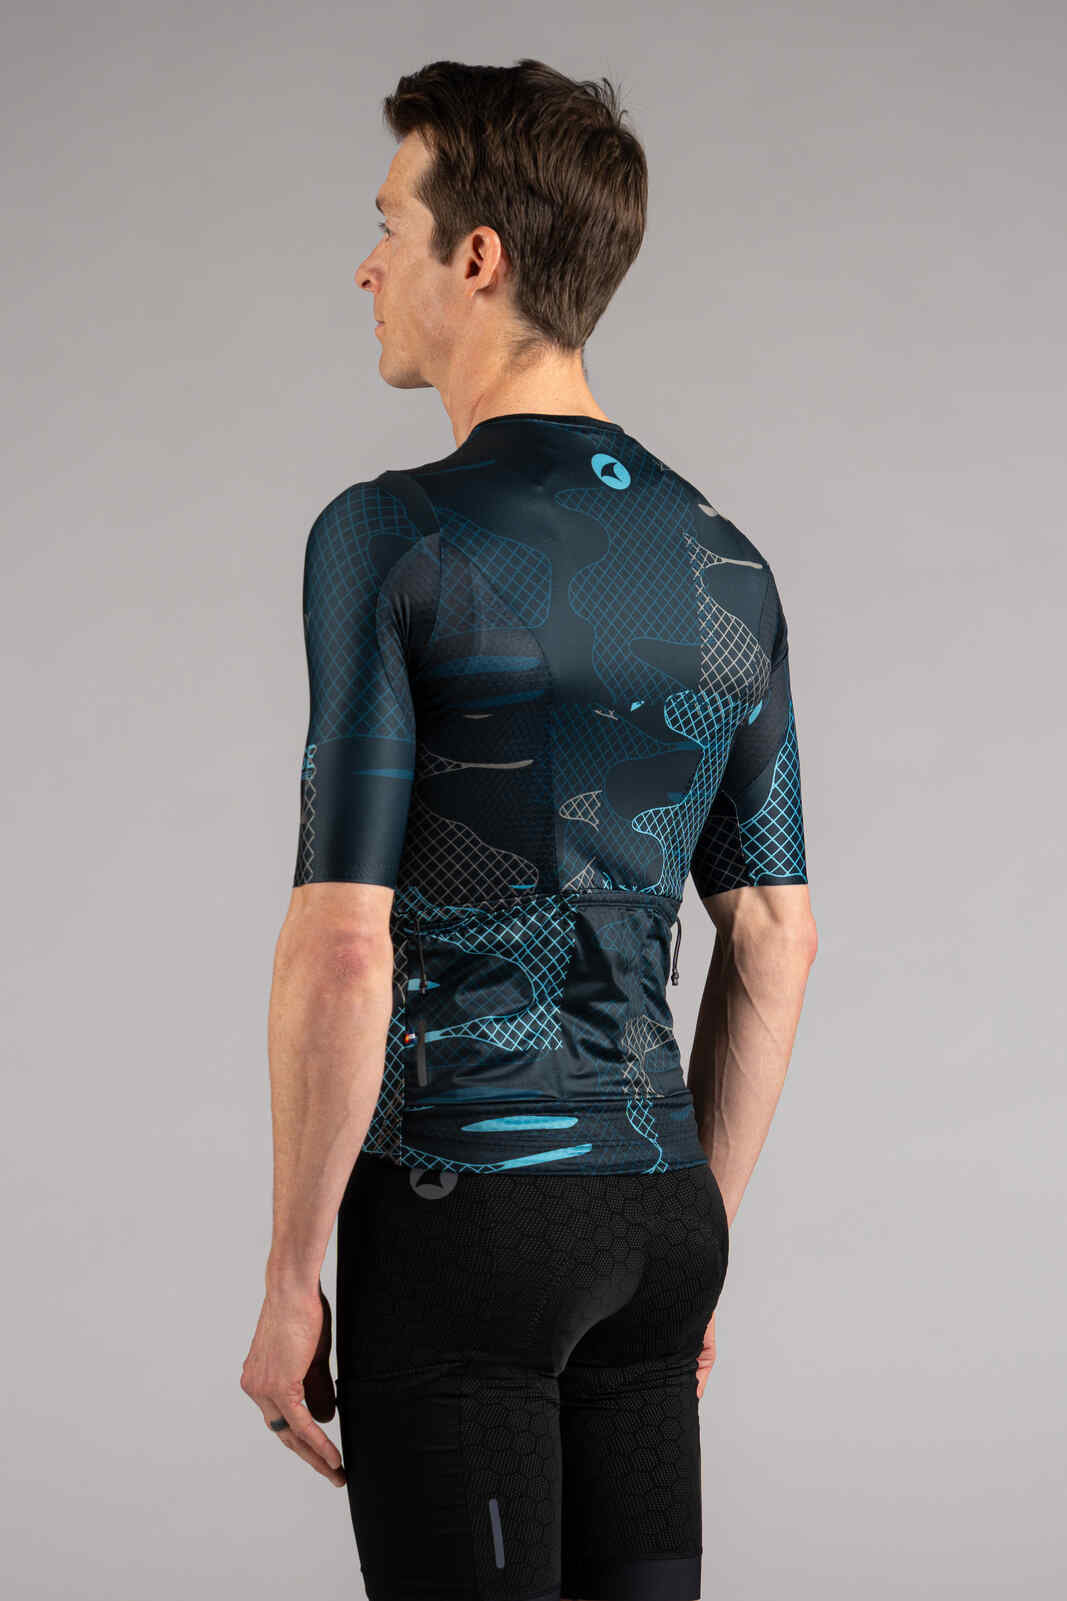 Men's Navy Blue Gravel Cycling Jersey - Back View